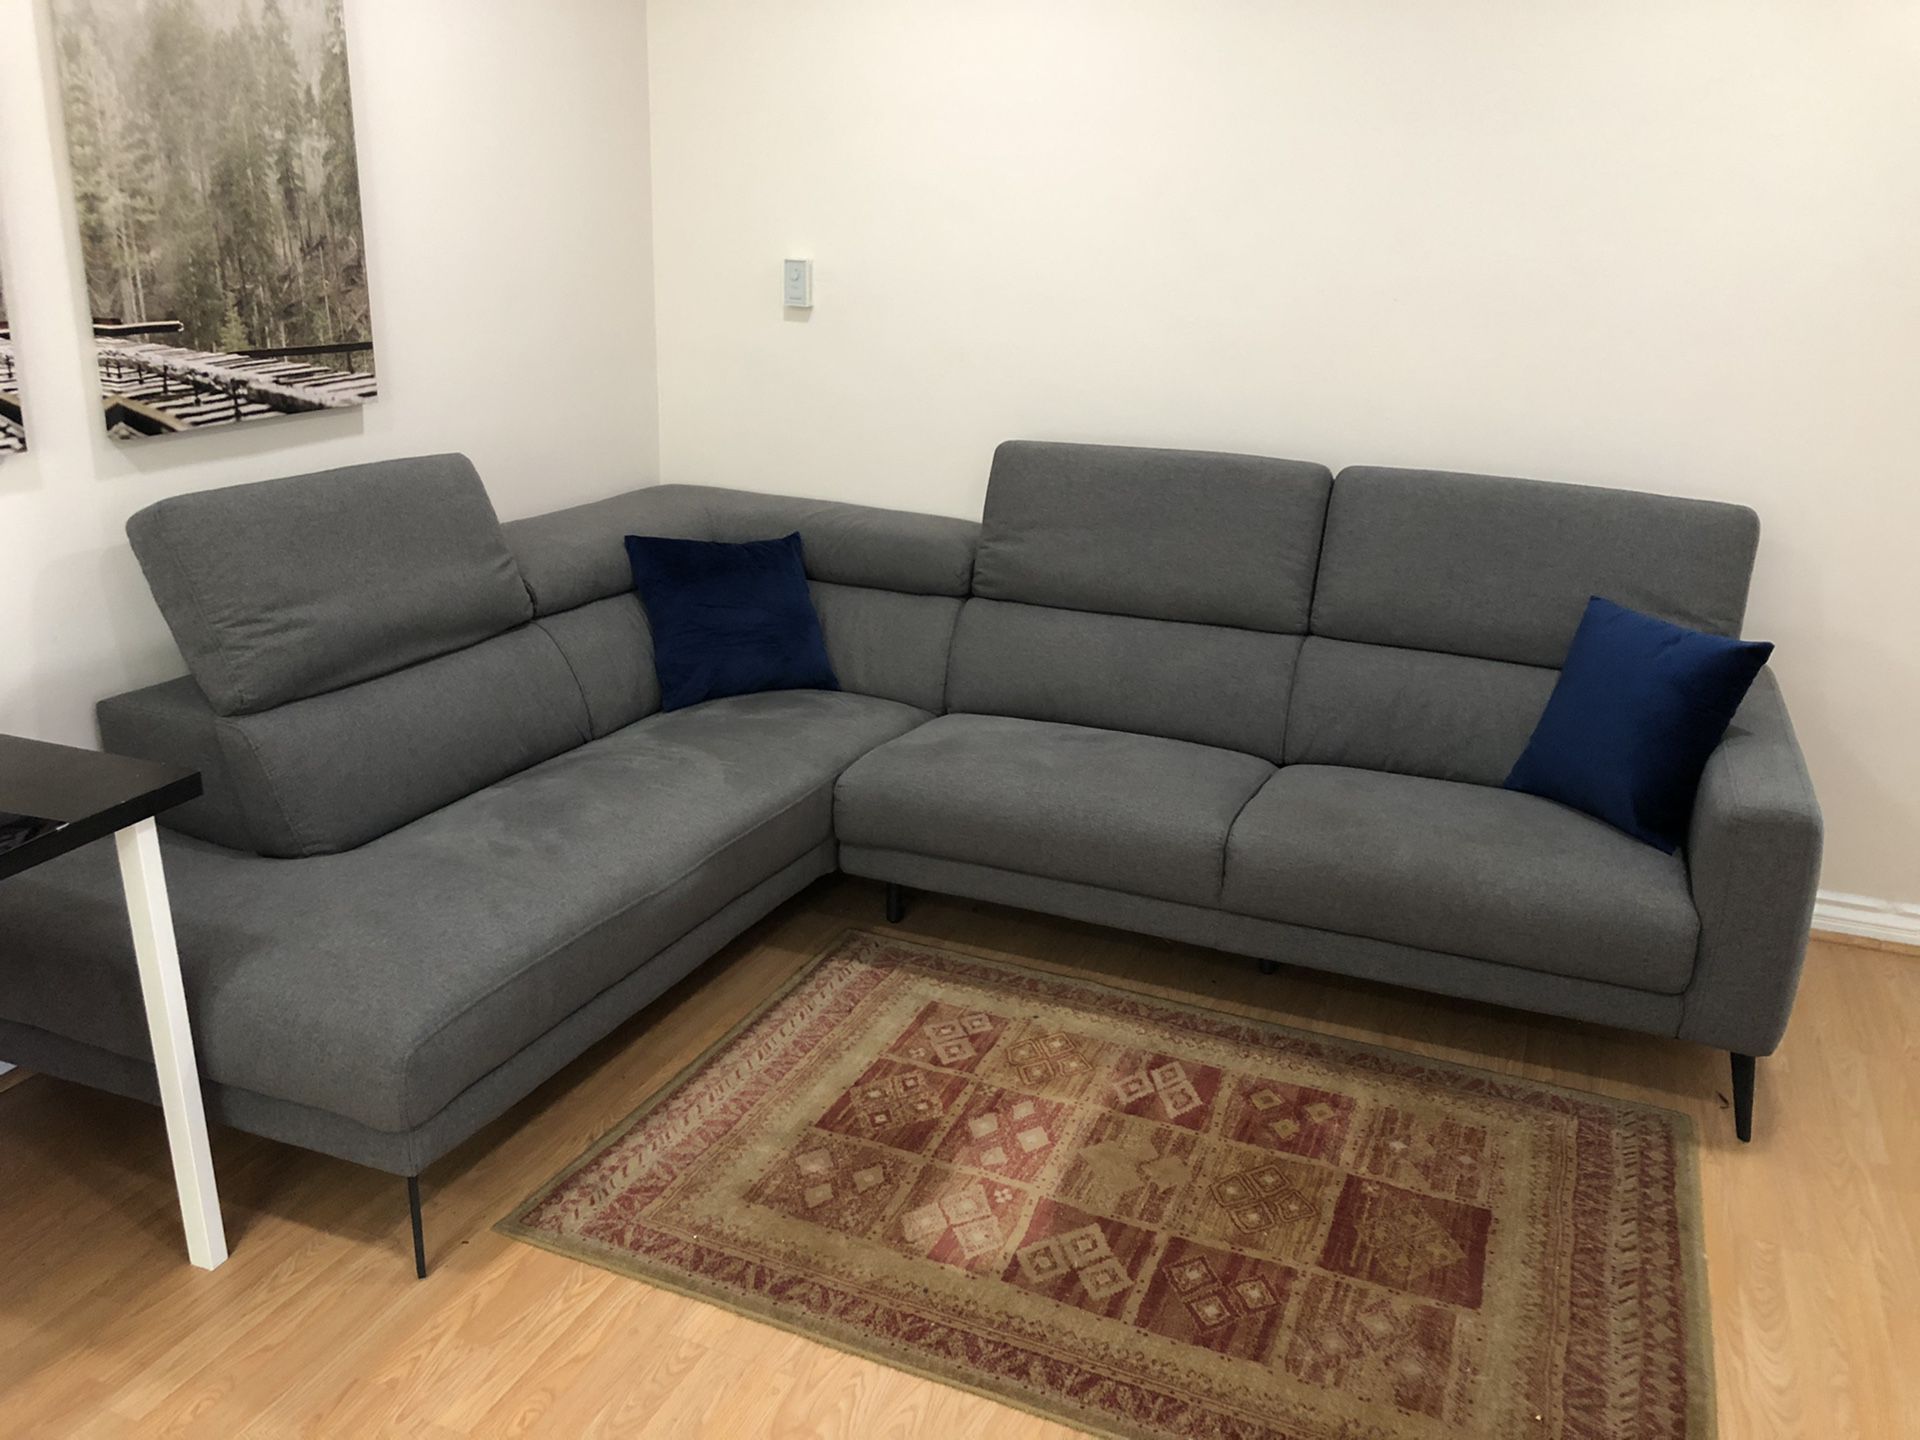 9’6” x 7’6” Large Sectional Couch